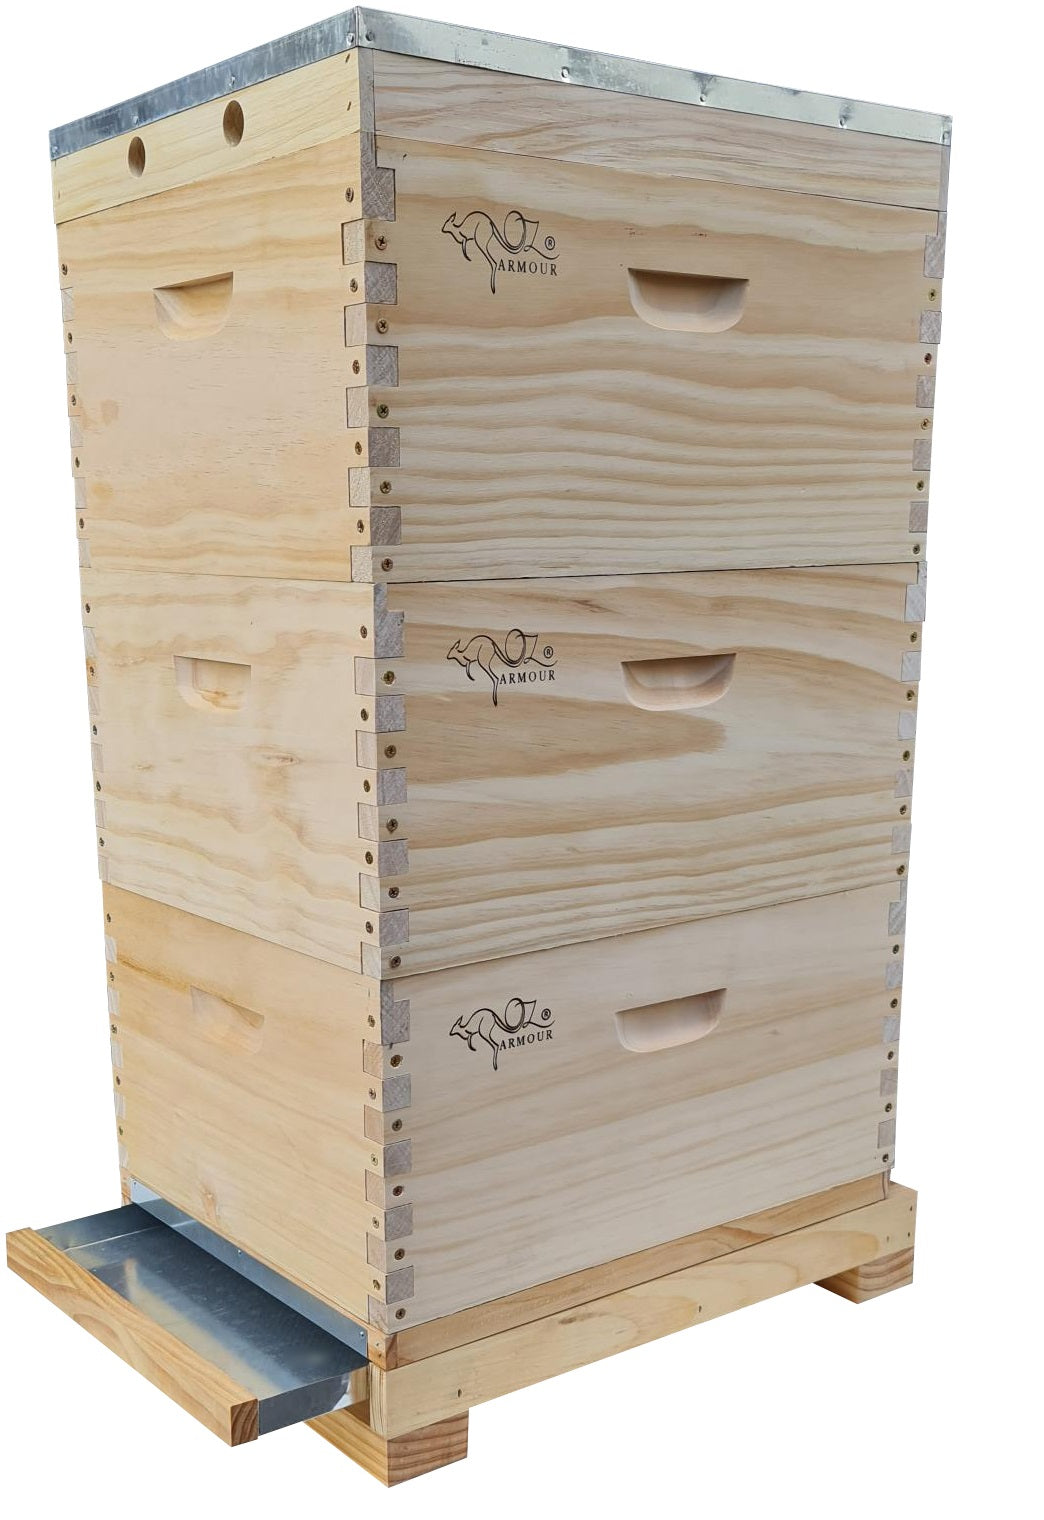 THREE LEVELS OZ ARMOUR BEEHIVE WITH MESH BOTTOM BOARD